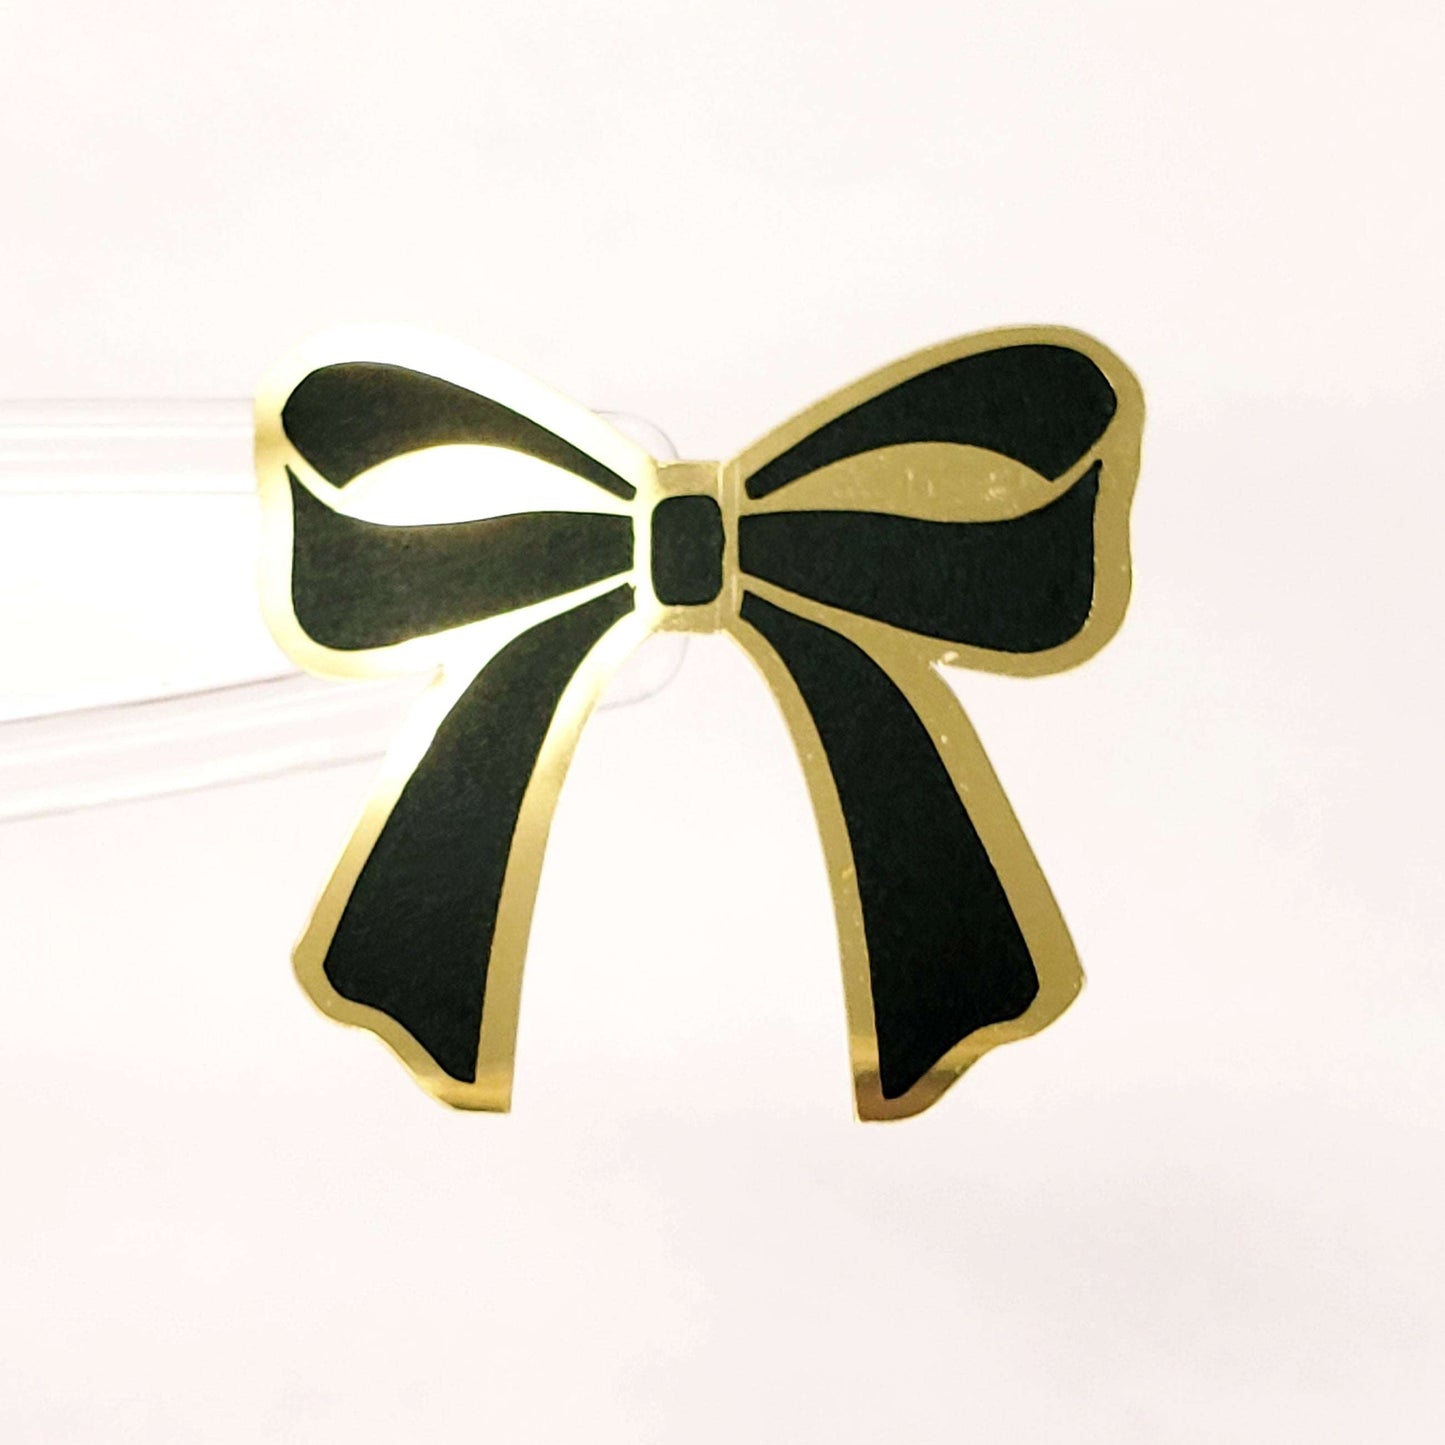 Bow Stickers, set of 28 black and gold ribbon shaped decals